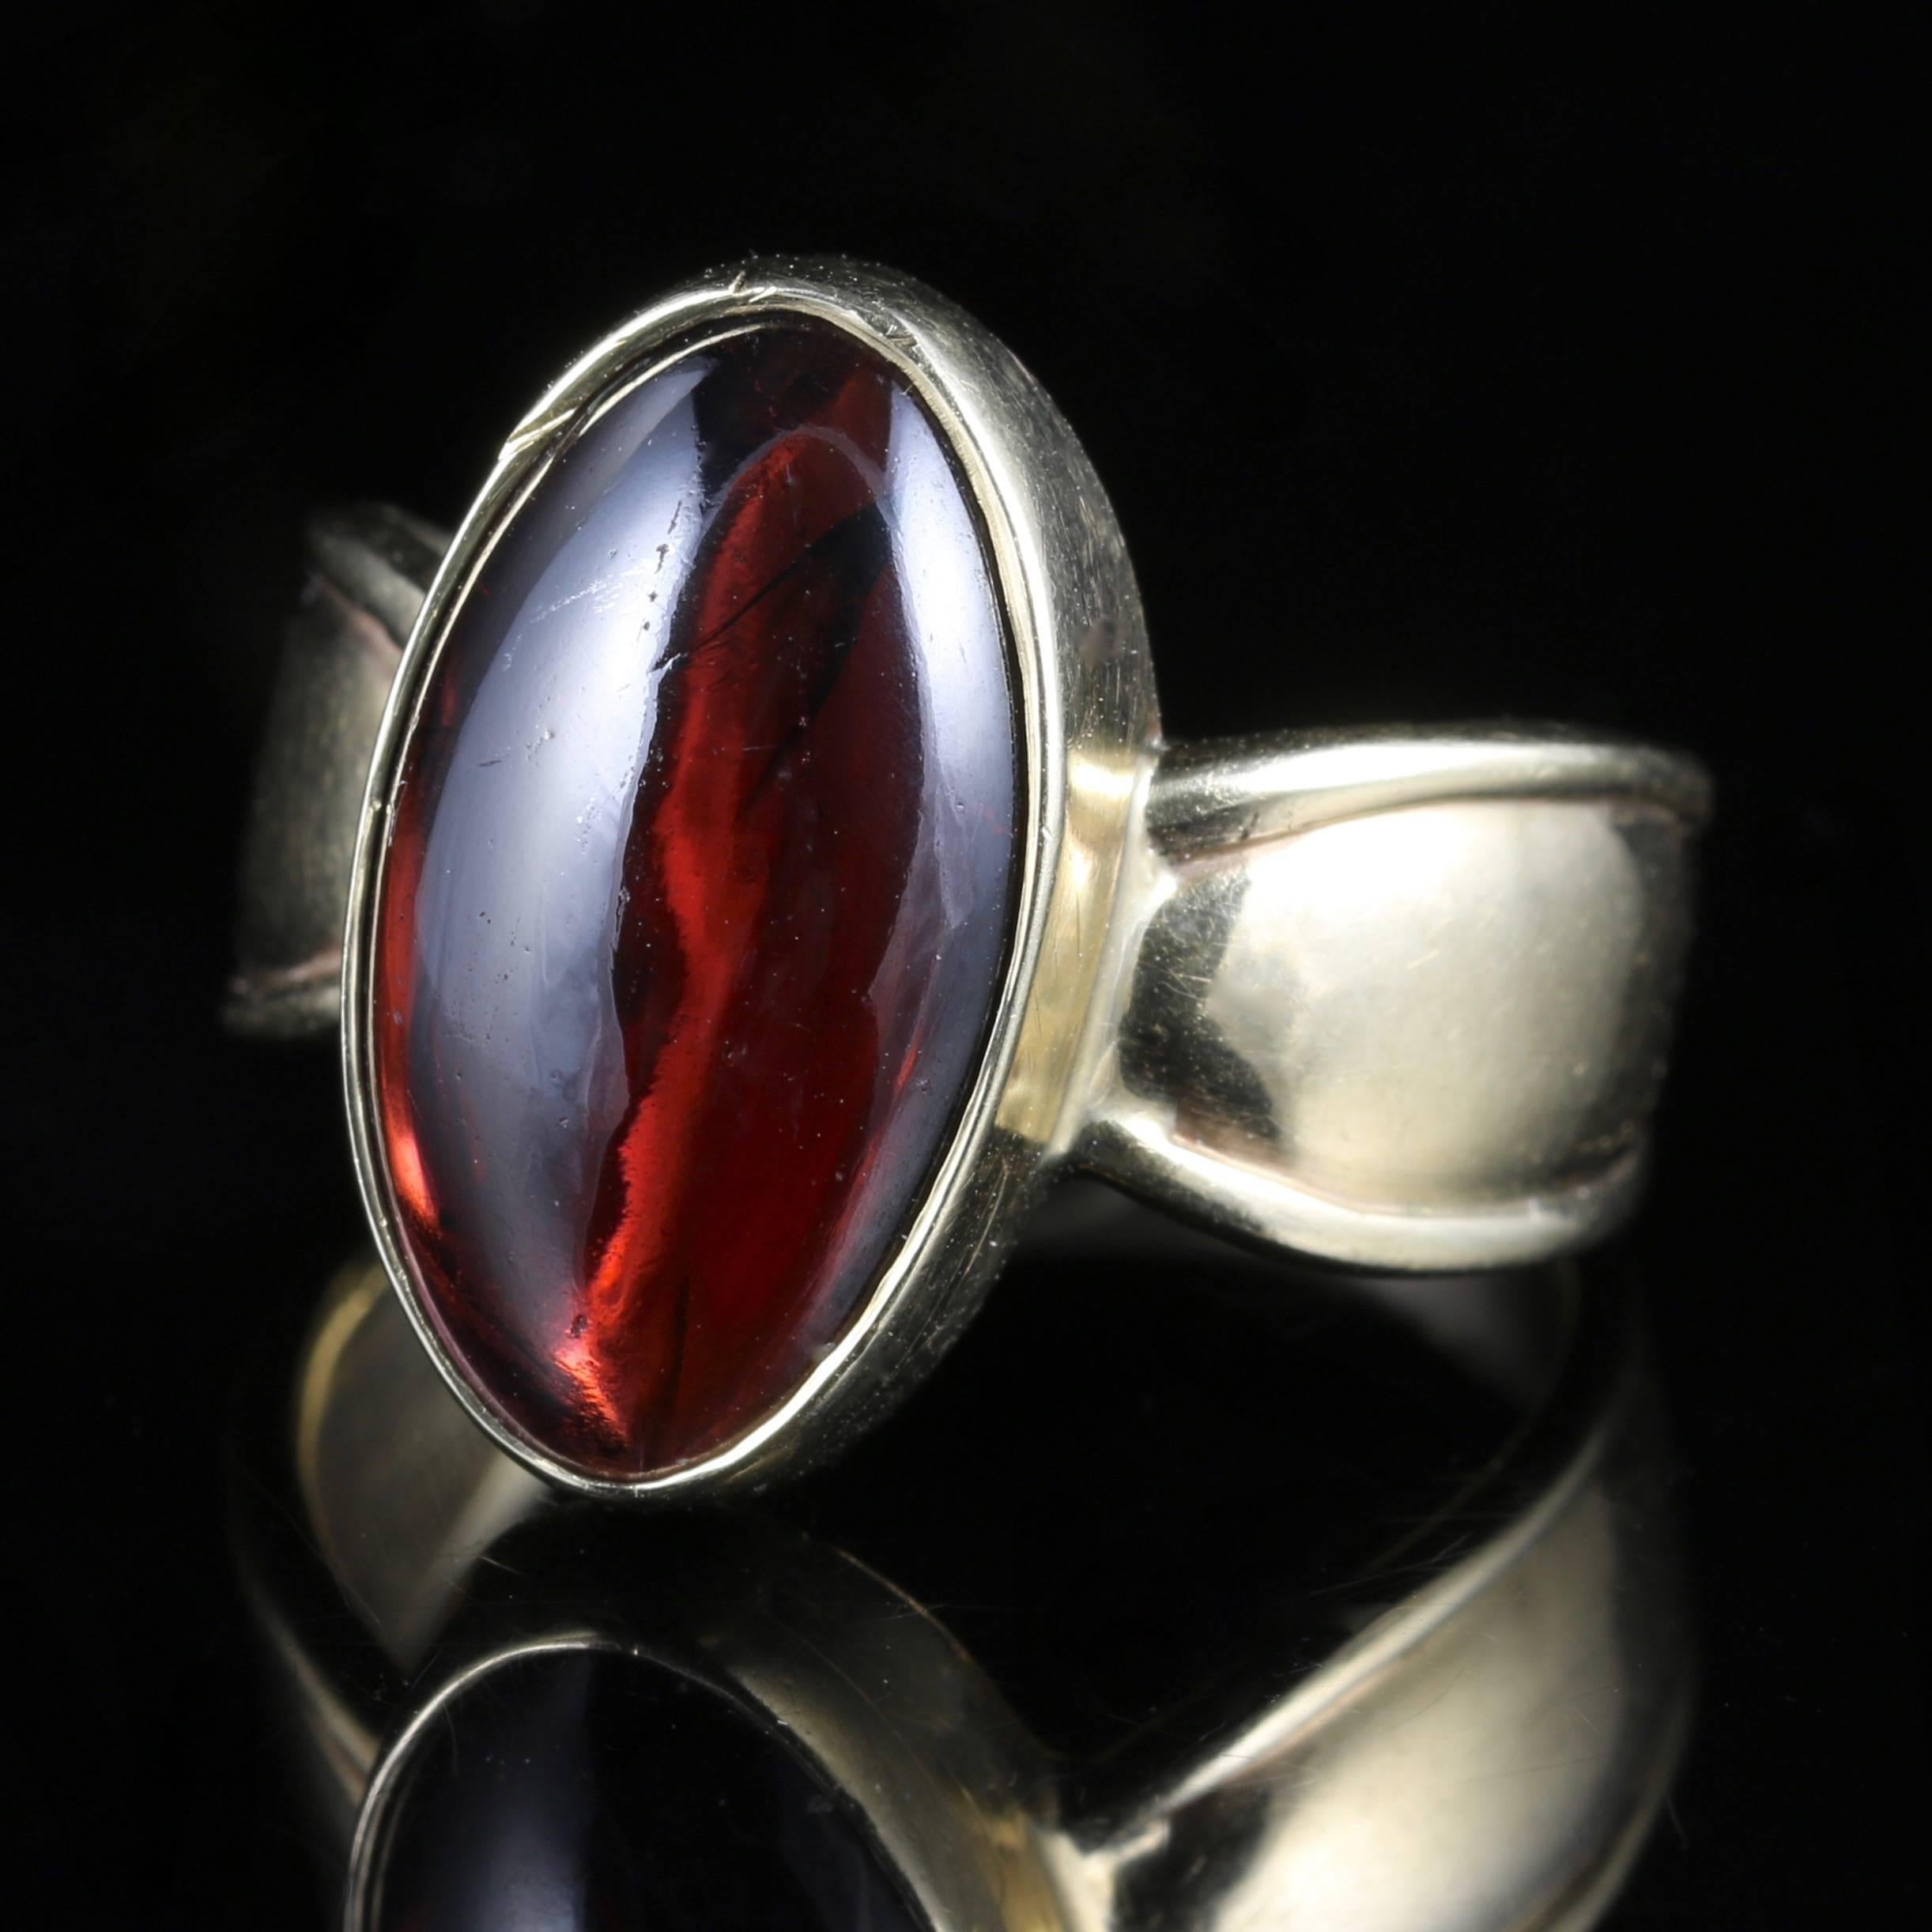 To read more please click continue reading further down the page.

This genuine 9ct Yellow Gold Victorian cabochon Garnet ring is stunning, Circa 1900

Set with a large central Garnet which is over 6ct in size, and beautifully polished to